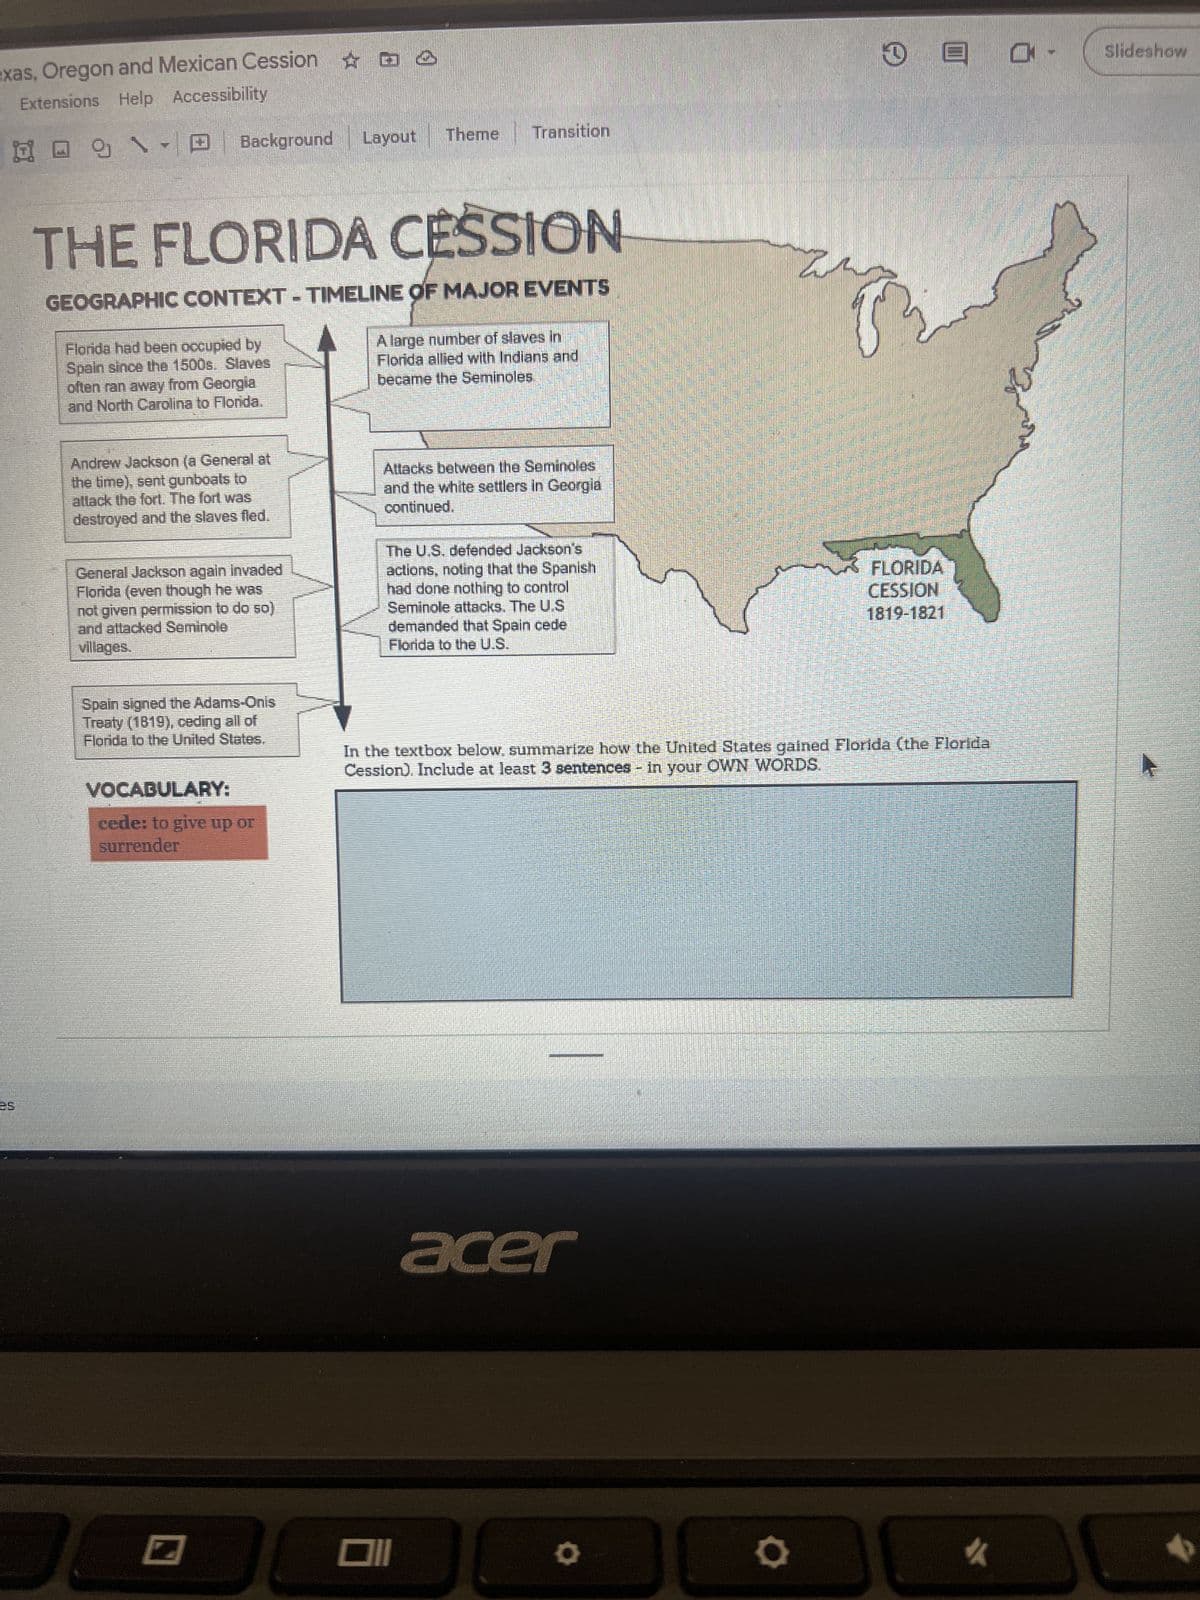 exas, Oregon and Mexican Cession
Extensions Help Accessibility
Layout
Background
Theme Transition
THE FLORIDA CESSION
GEOGRAPHIC CONTEXT-TIMELINE OF MAJOR EVENTS
Florida had been occupied by
Spain since the 1500s. Slaves
often ran away from Georgia
and North Carolina to Florida.
A large number of slaves in
Florida allied with Indians and
became the Seminoles
Andrew Jackson (a General at
the time), sent gunboals to
attack the fort. The fort was
destroyed and the slaves fled.
General Jackson again invaded
Florida (even though he was
not given permission to do so)
and attacked Seminole
villages.
Attacks between the Seminoles
and the white settlers in Georgia
continued.
The U.S. defended Jackson's
actions, noting that the Spanish
had done nothing to control
Seminole attacks. The U.S
demanded that Spain cede
Florida to the U.S.
FLORIDA
CESSION
1819-1821
Spain signed the Adams-Onis
Treaty (1819), ceding all of
Florida to the United States.
In the textbox below, summarize how the United States gained Florida (the Florida
Cession). Include at least 3 sentences - in your OWN WORDS.
VOCABULARY:
cede: to give up or
surrender
וום
acer
Slideshow